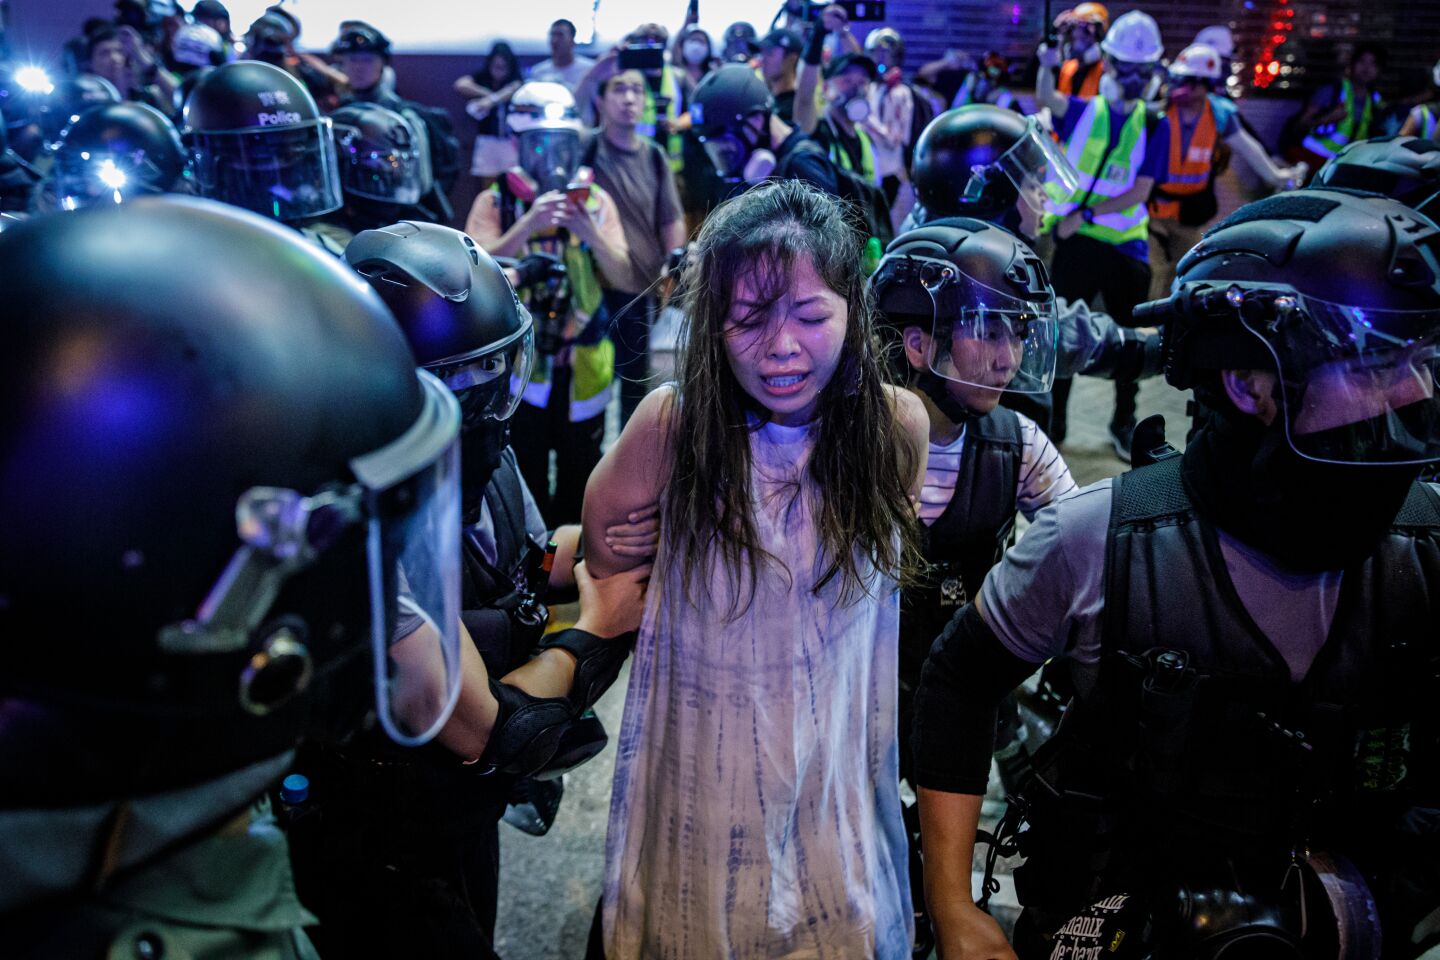 Police officers pepper spray and arrest a woman during a sweep for anti-government protesters on Nathan Road in the Mong Kok district in Hong Kong.